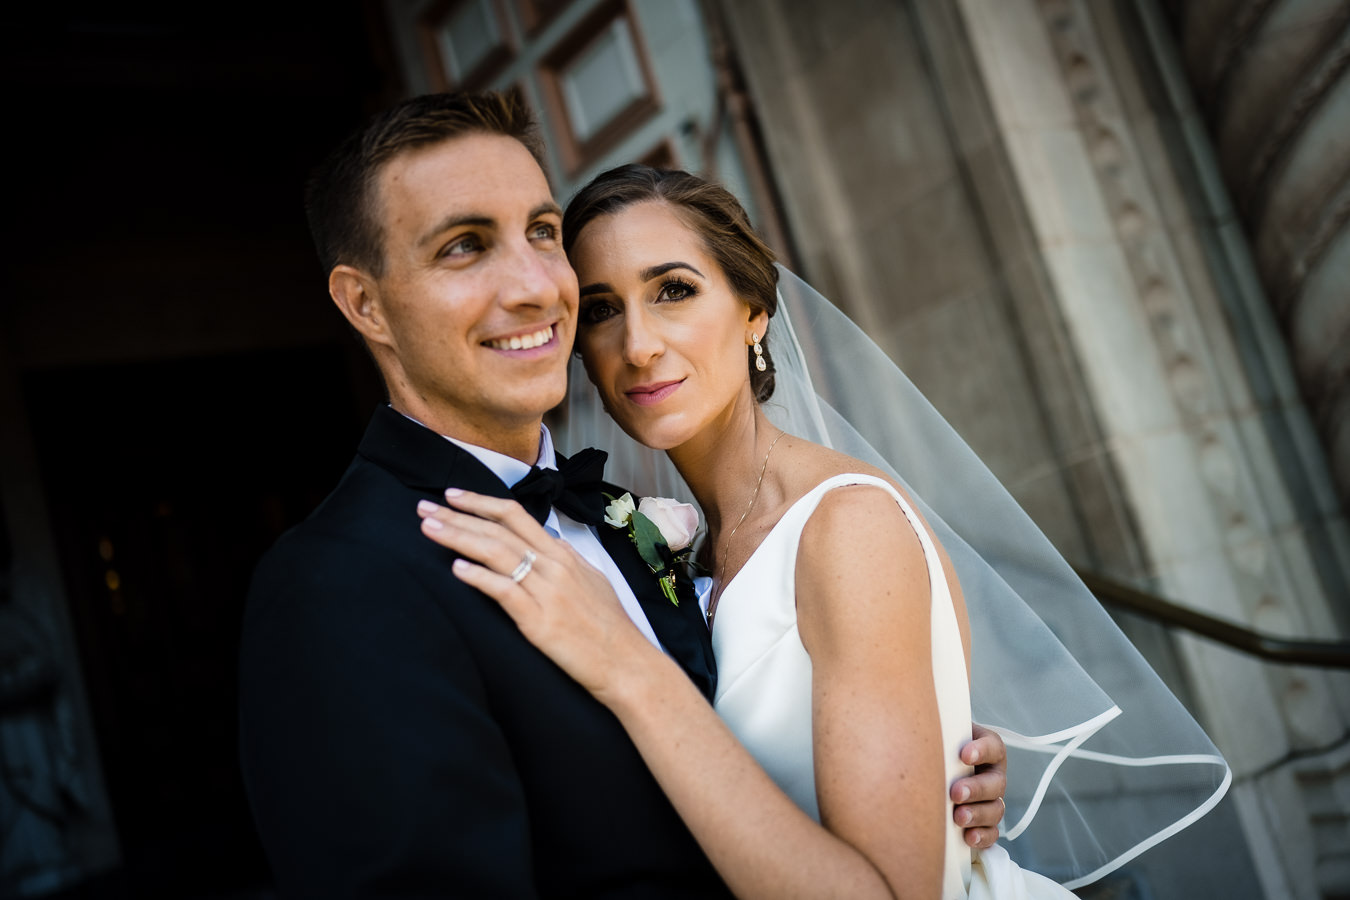 Olympic Club Lakeside Wedding Photo - Portraits at St. Peter & Paul Cathedral